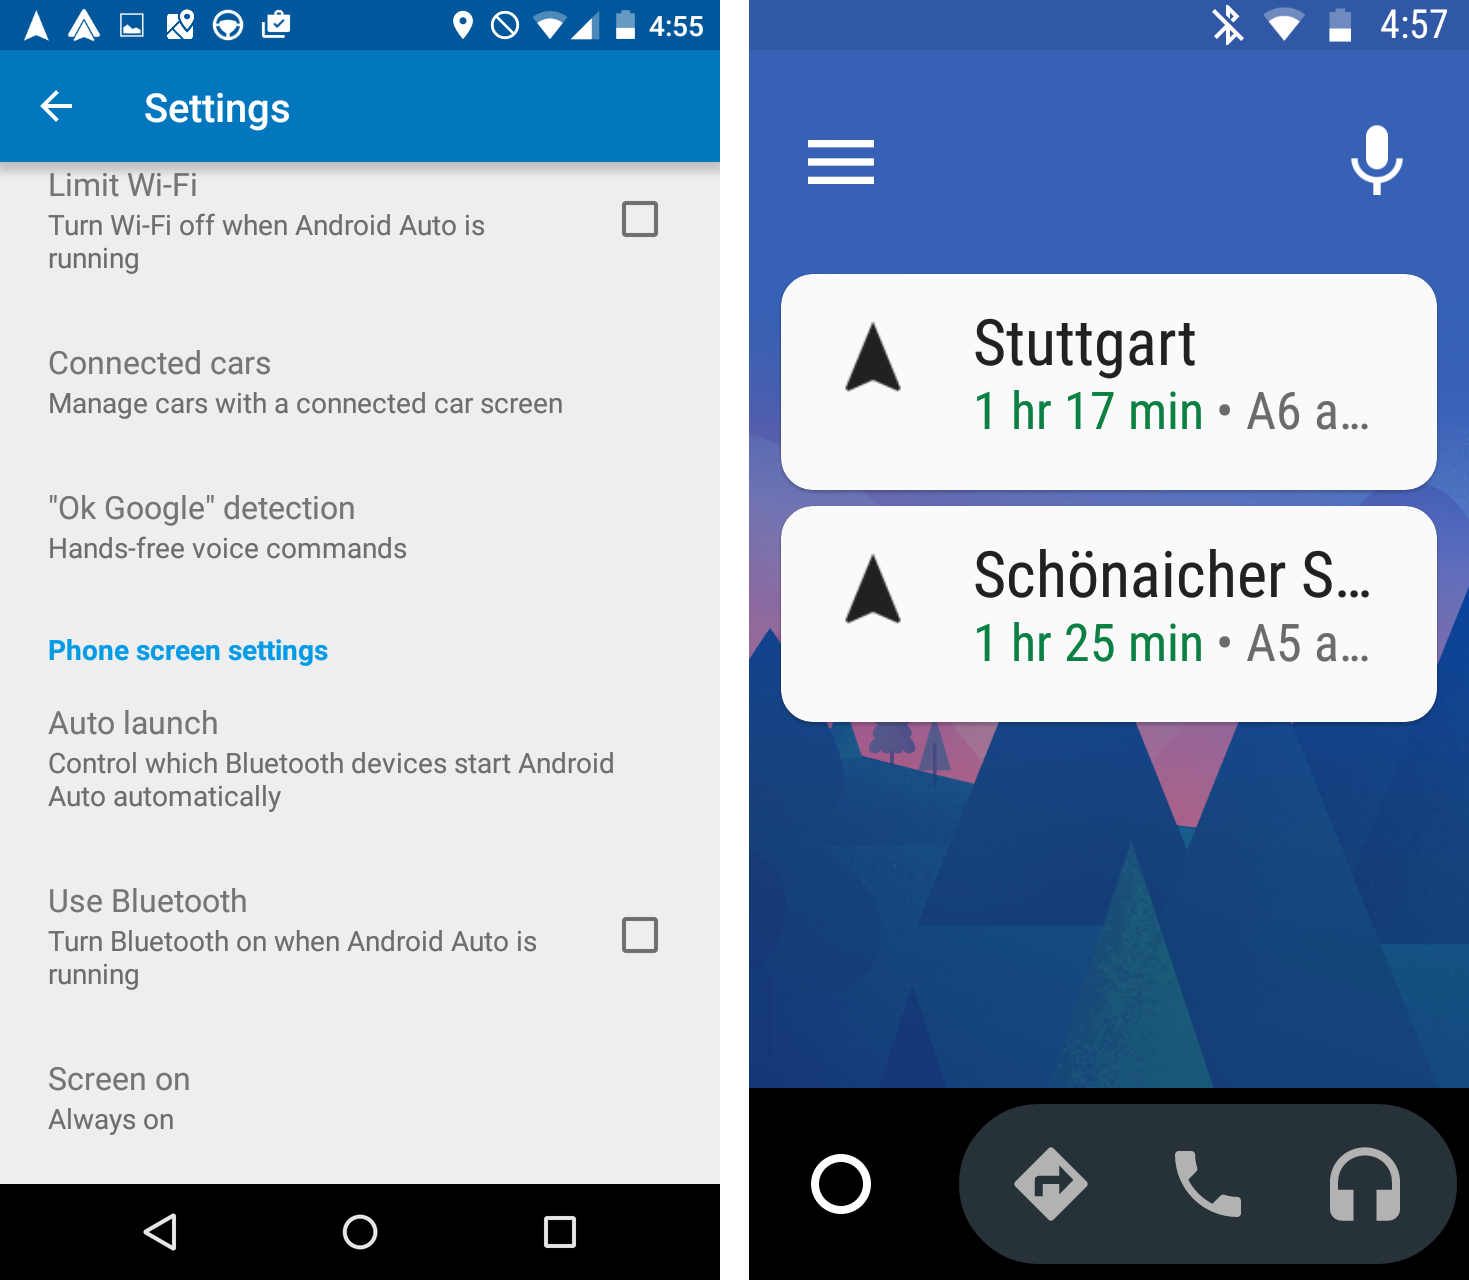 Figure 29: Google Android Auto – settings auto launch when Bluetooth connects (left). Google Android Auto – home screen with navigation recommendations (right).